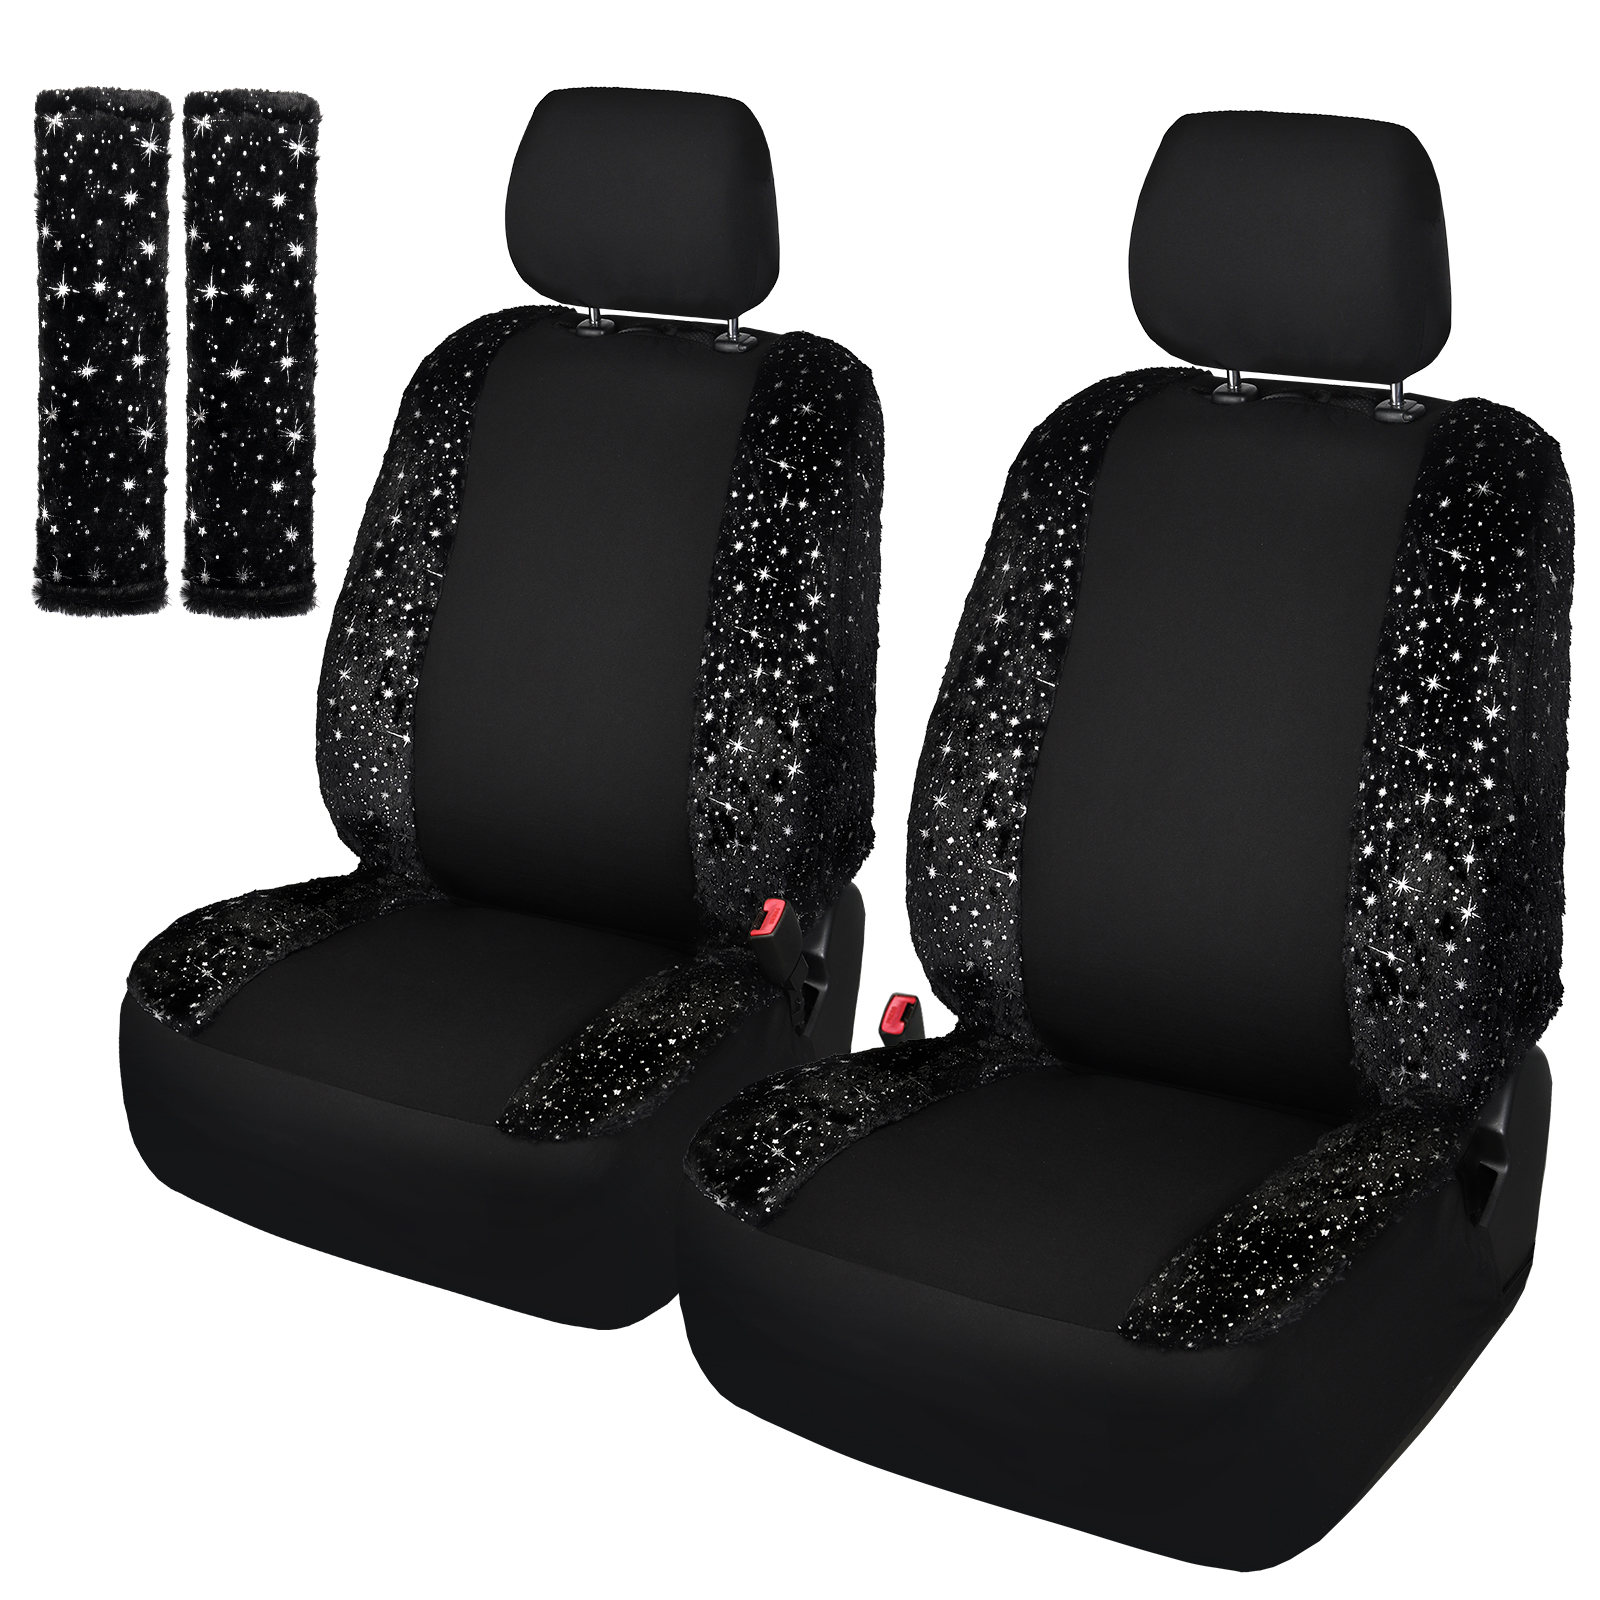 8pcs Universal fit STARRY Low Back 2 Front Seat Cover for SUVs Sedans Trucks Featured Image